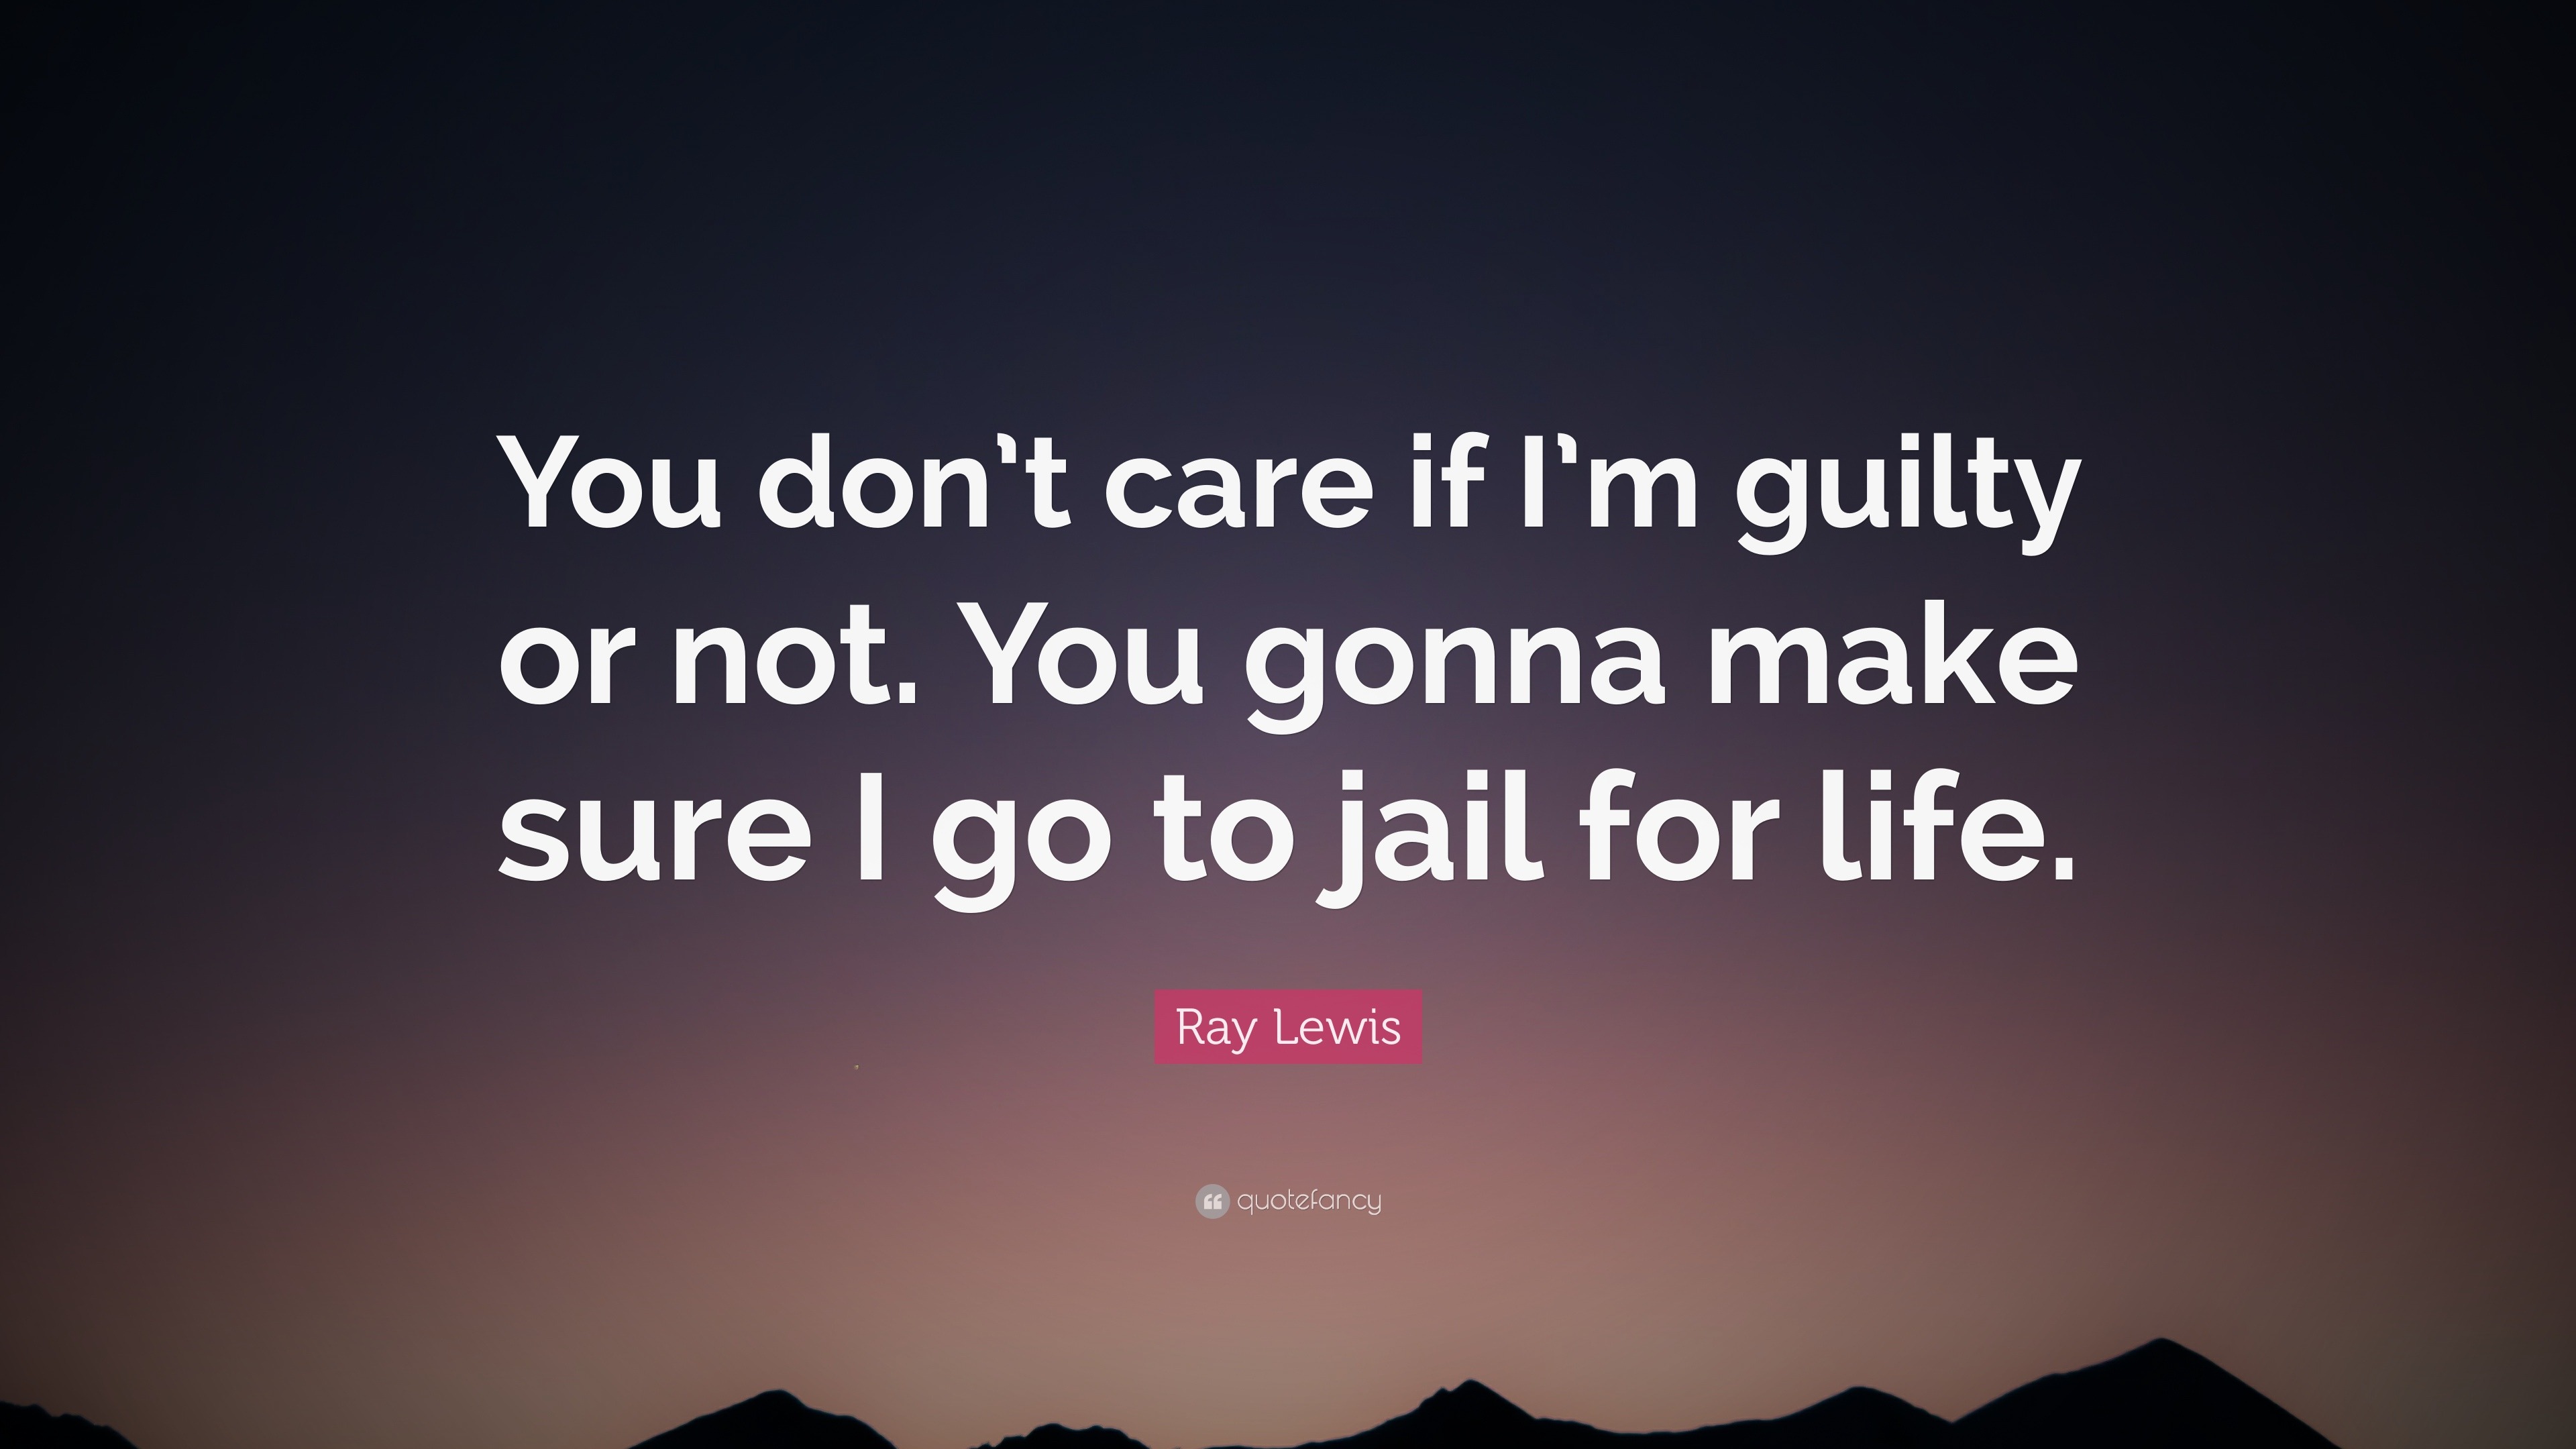 Ray Lewis Quote: “You don’t care if I’m guilty or not. You gonna make ...